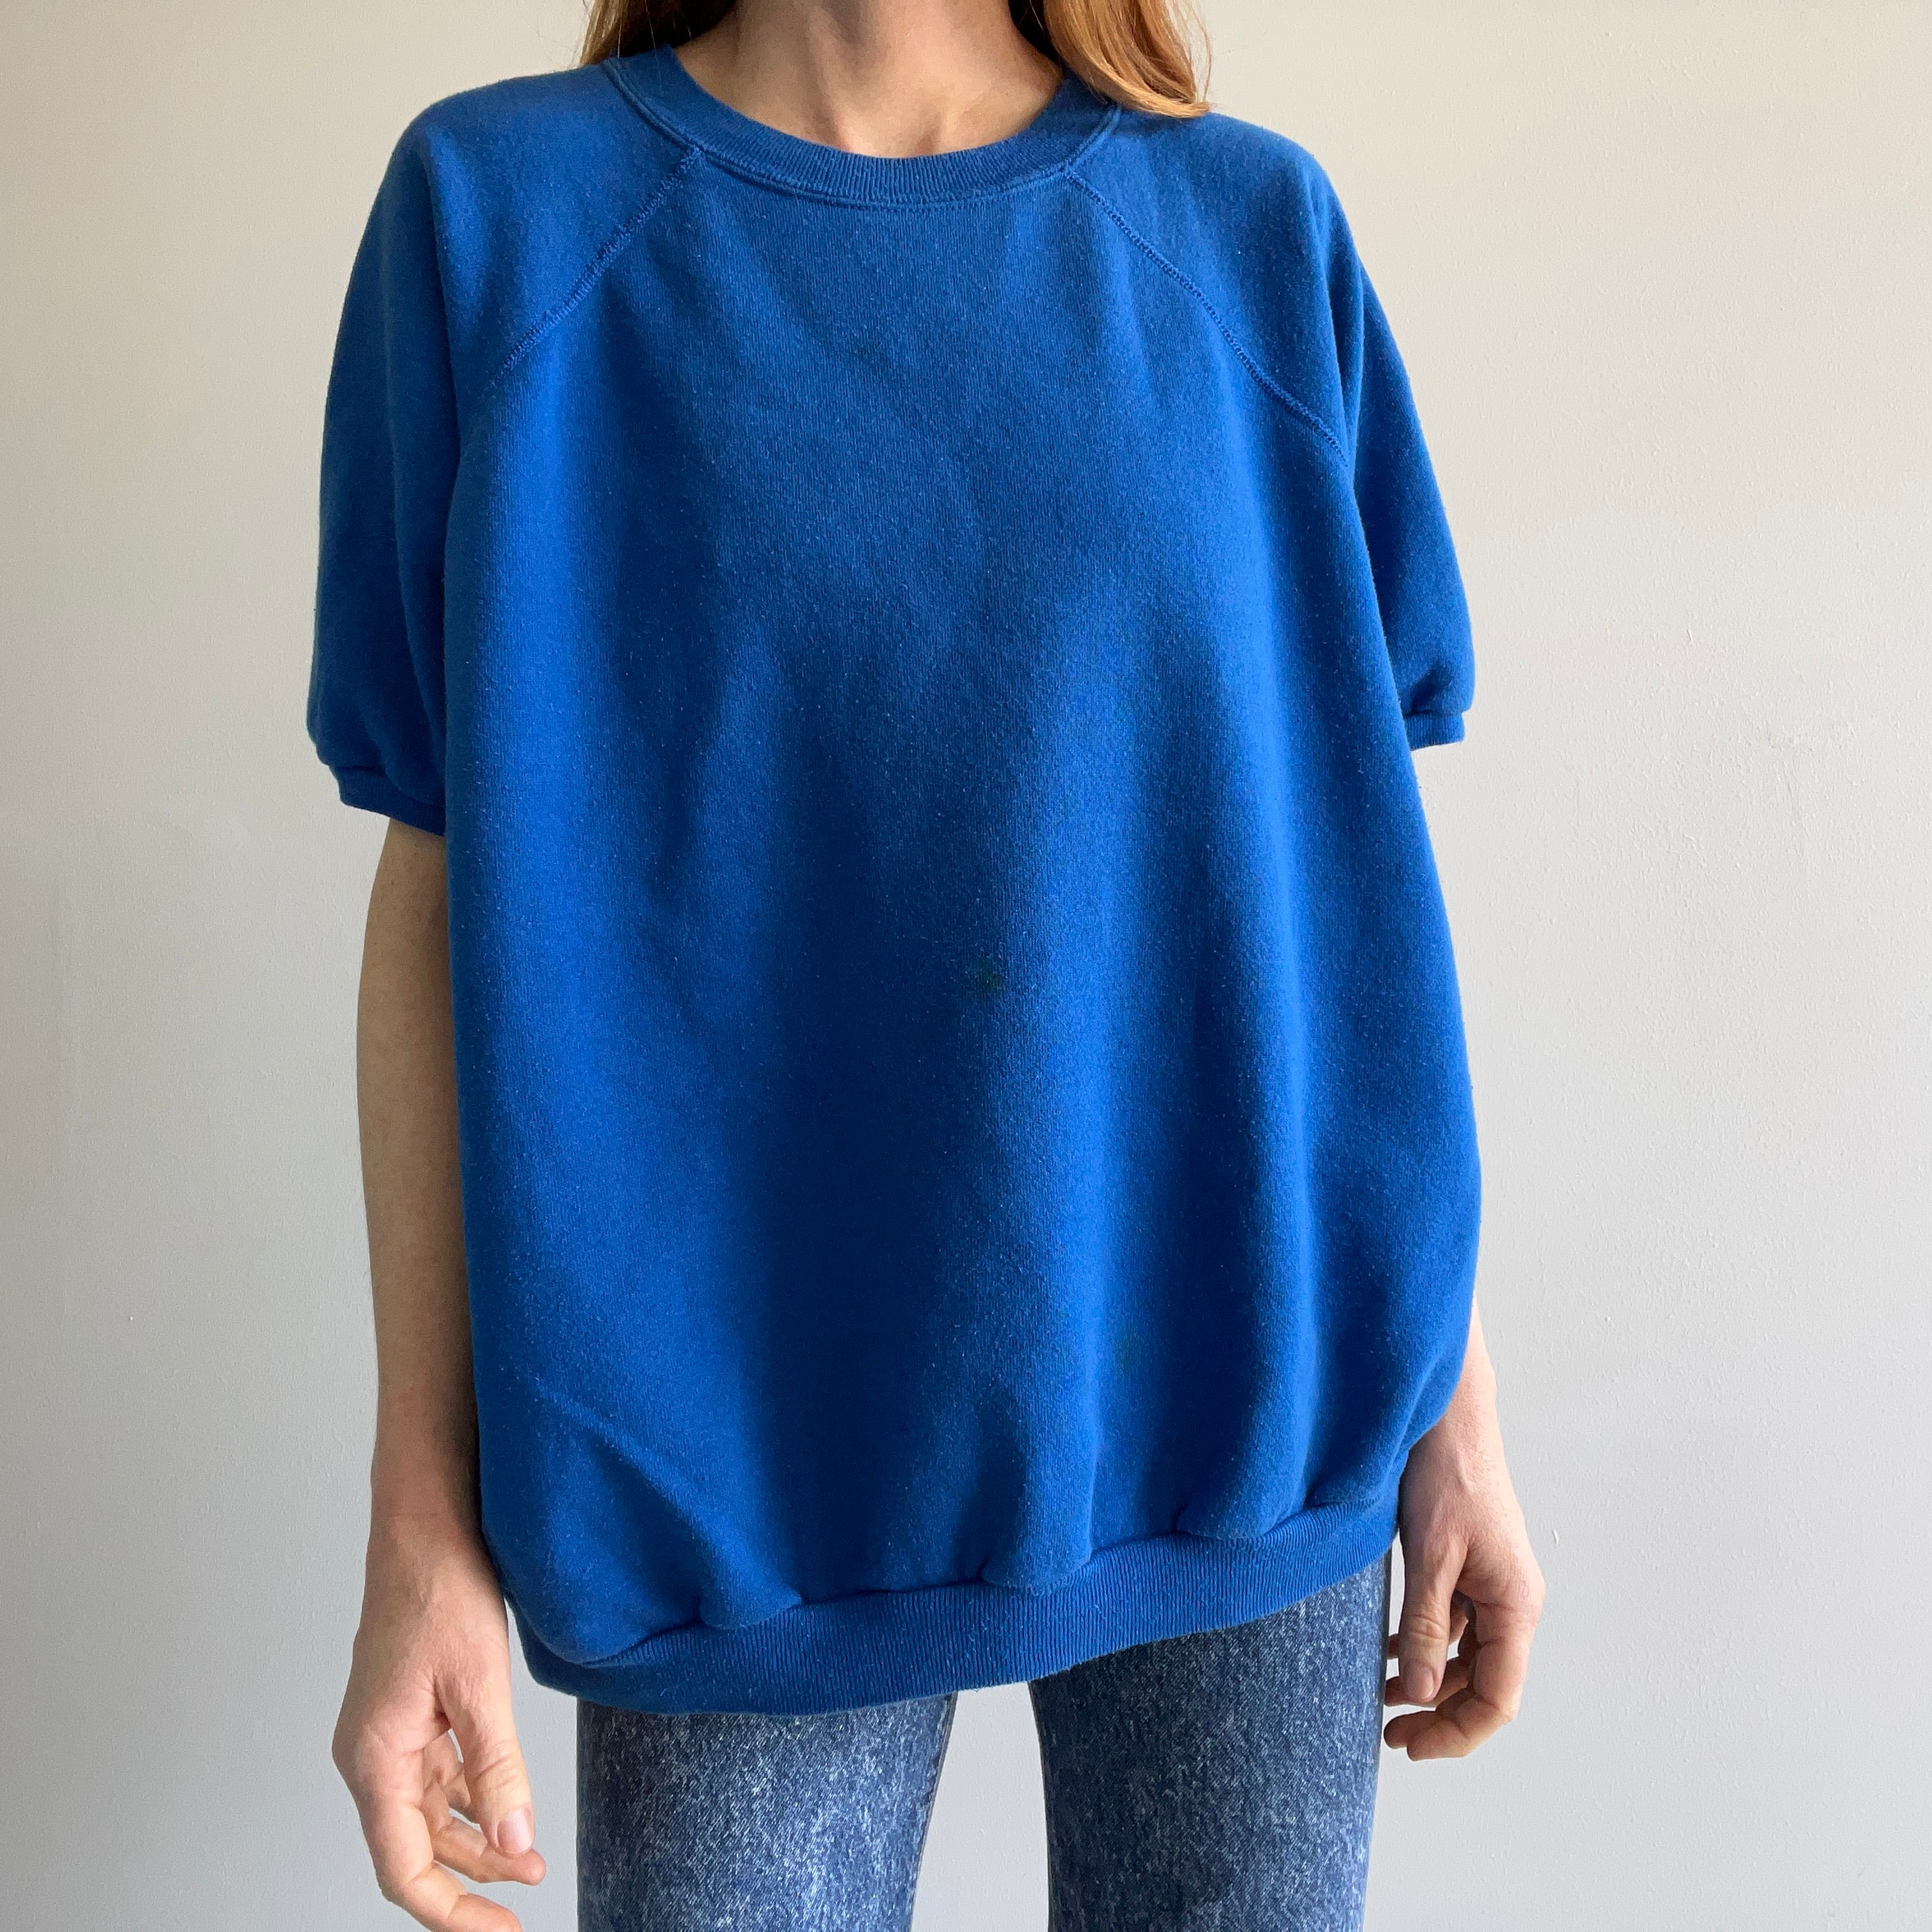 1980s Relaxed Fit Royal Blue Warm Up by Tultex